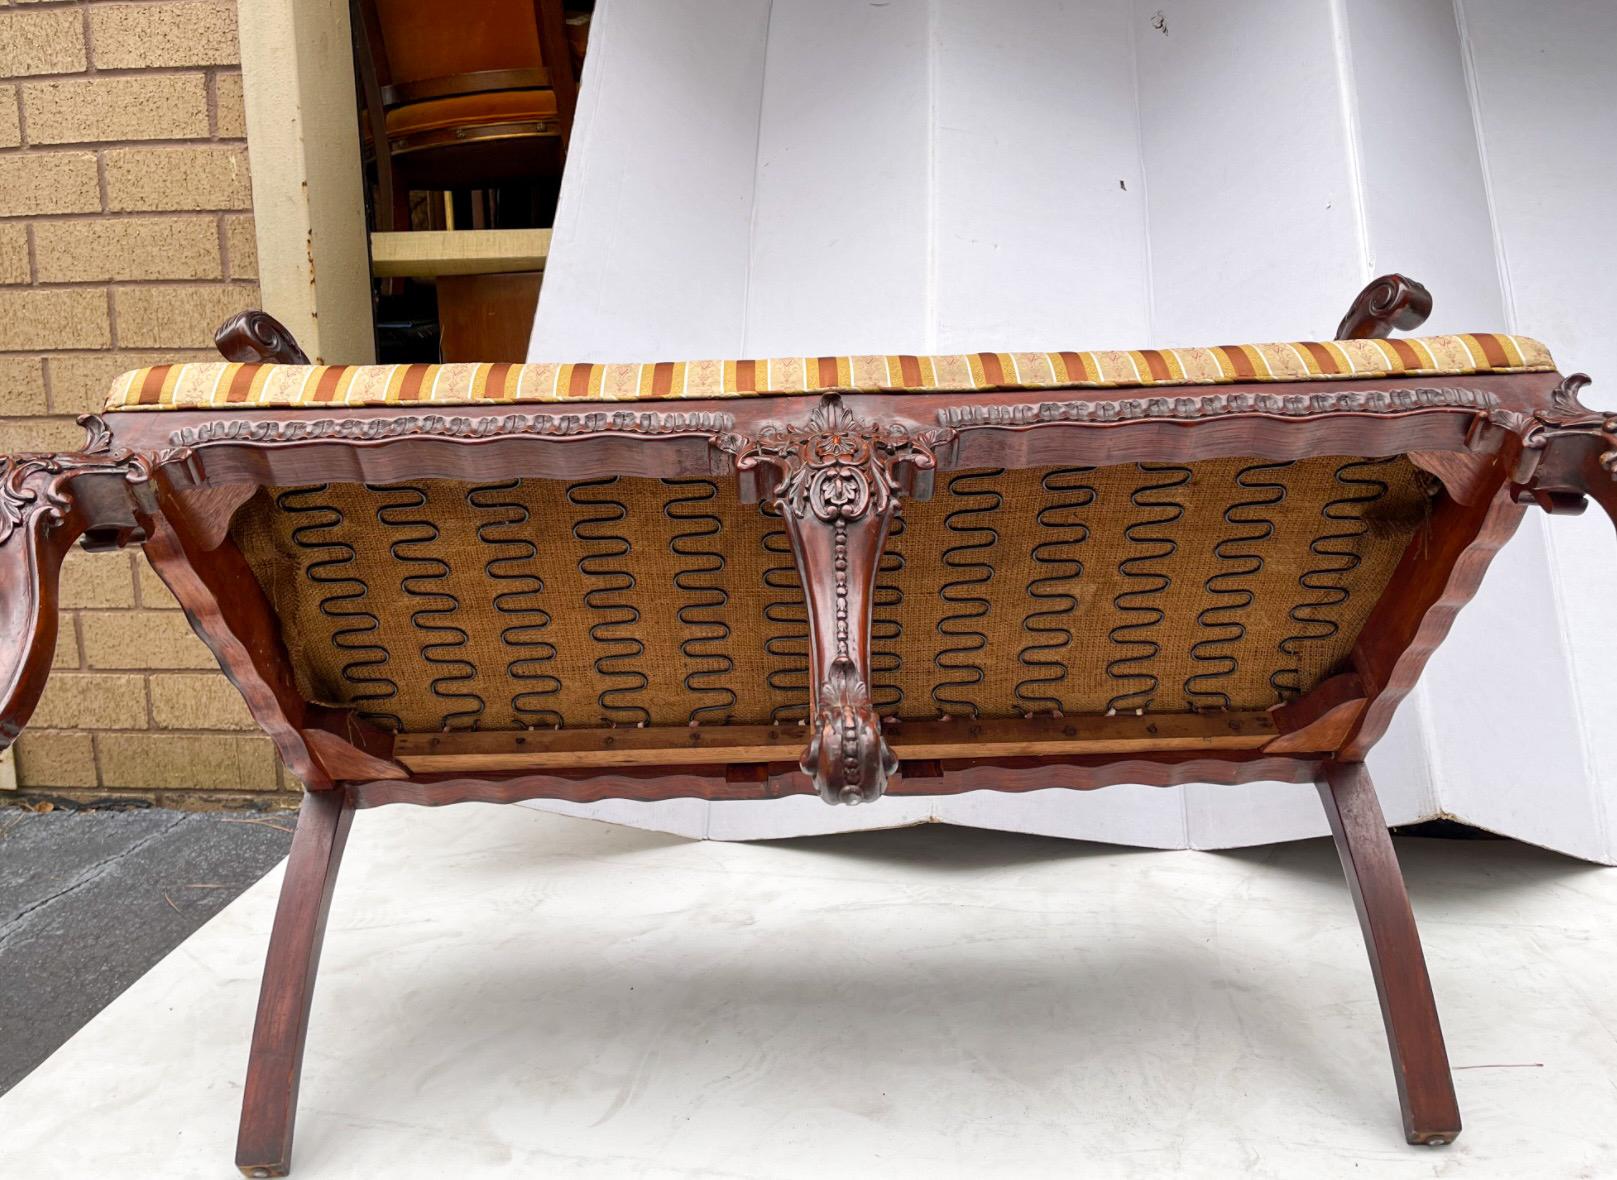 20th Century Early 20th-C. English Chinese Chippendale Style Carved Mahogany Settee / Bench  For Sale